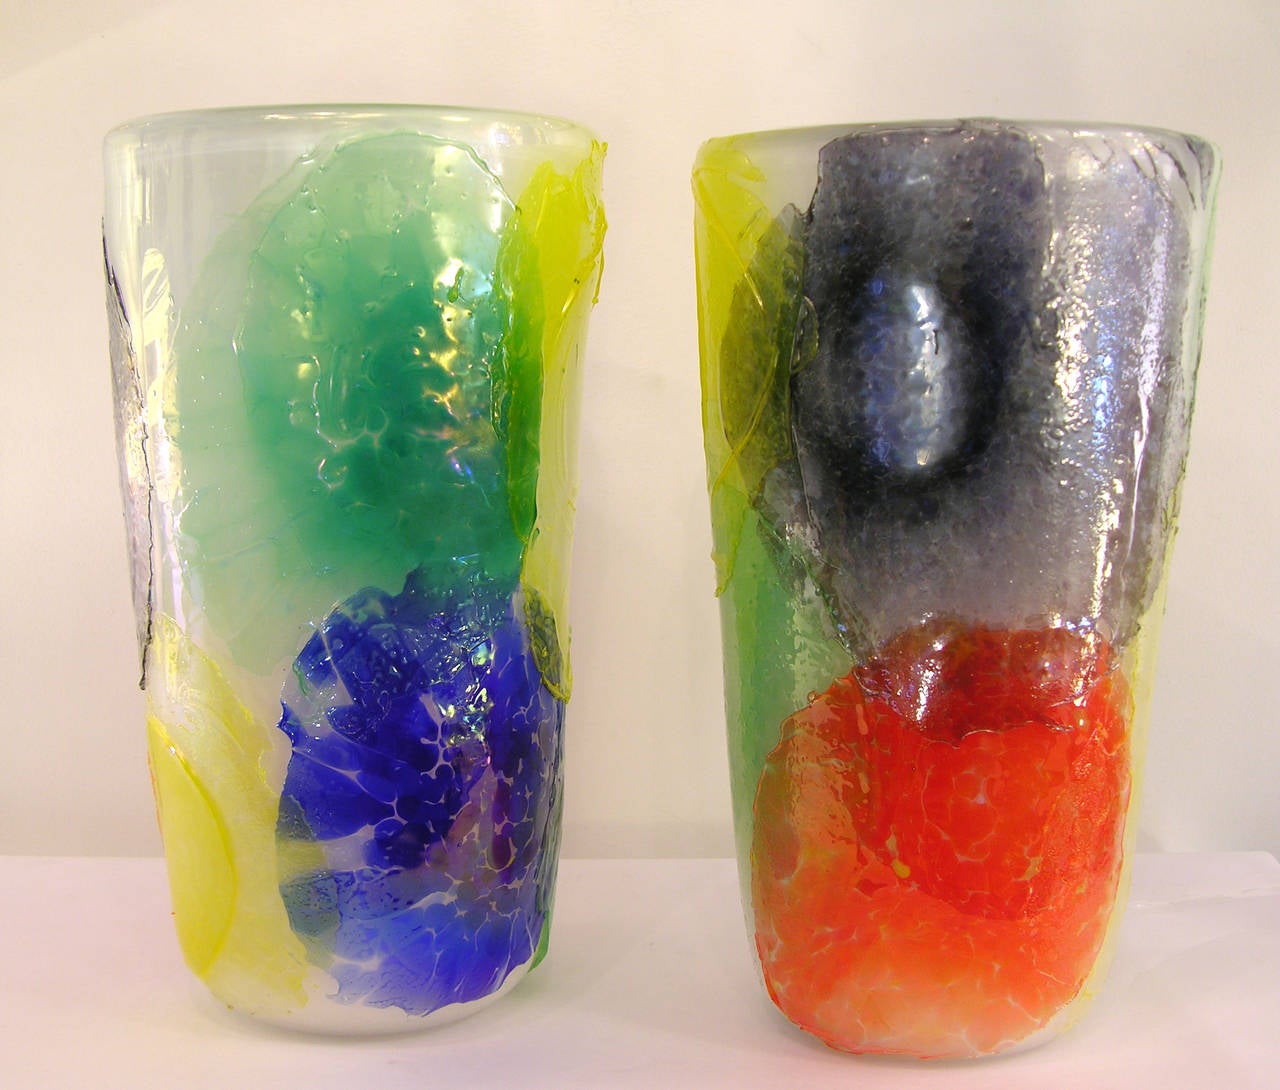 Striking Pair of Murano Glass Vases Decorated with Colorful Iridescent Disks 5